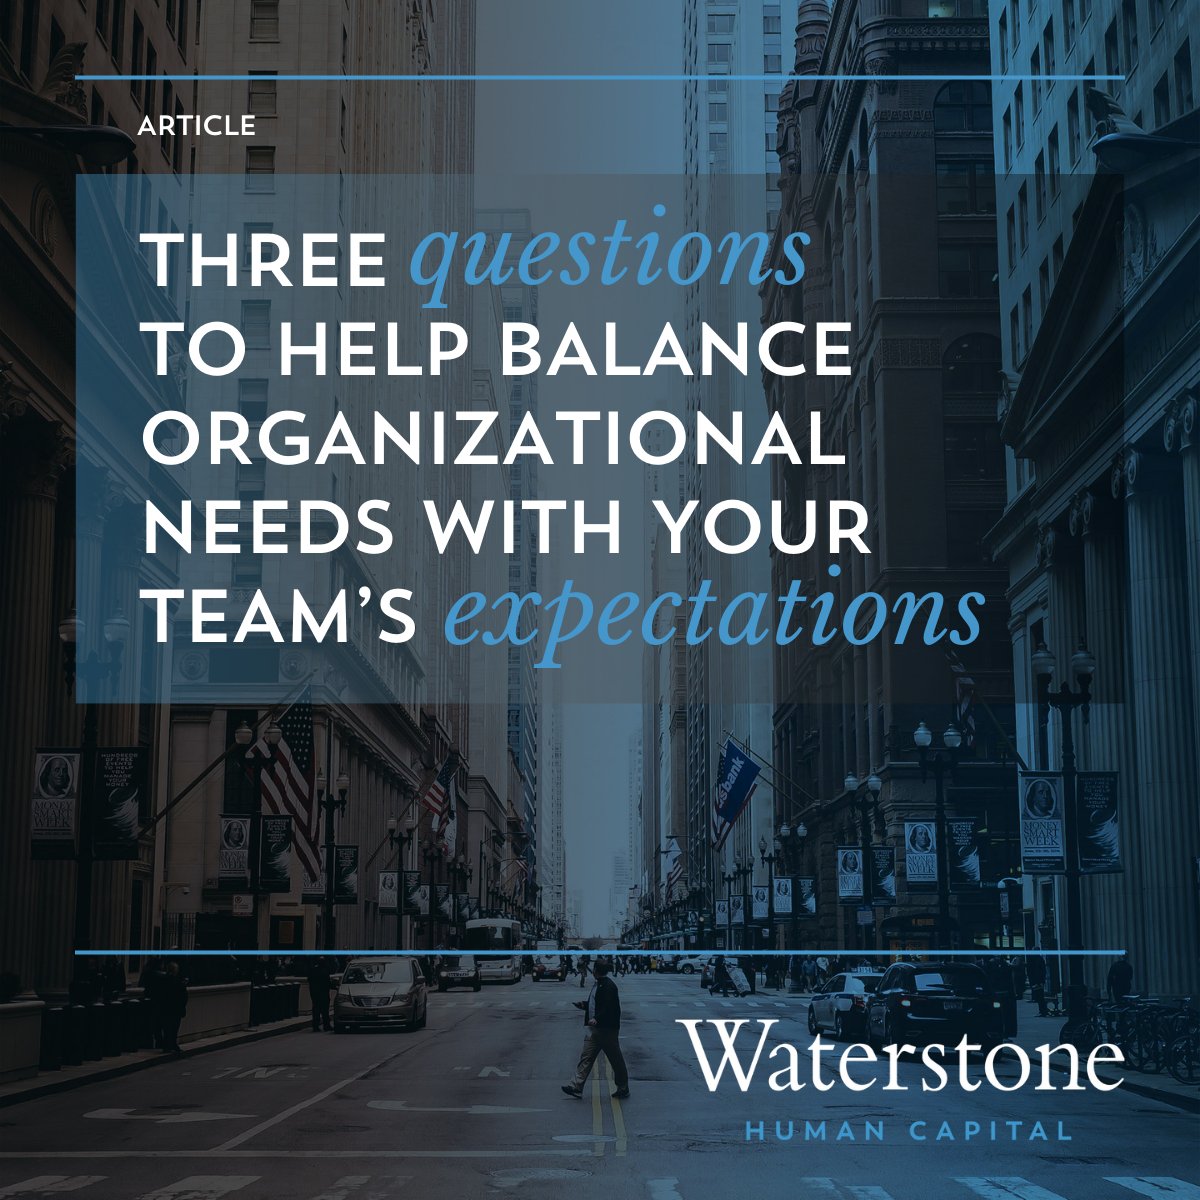 Discover three critical questions leaders must consider to strike the right balance between fostering a people-first culture and achieving organizational goals. ow.ly/nnMW50QP7Rn

#Leadership #OrganizationalCulture #RemoteWork #TeamExpectations #HighPerformance